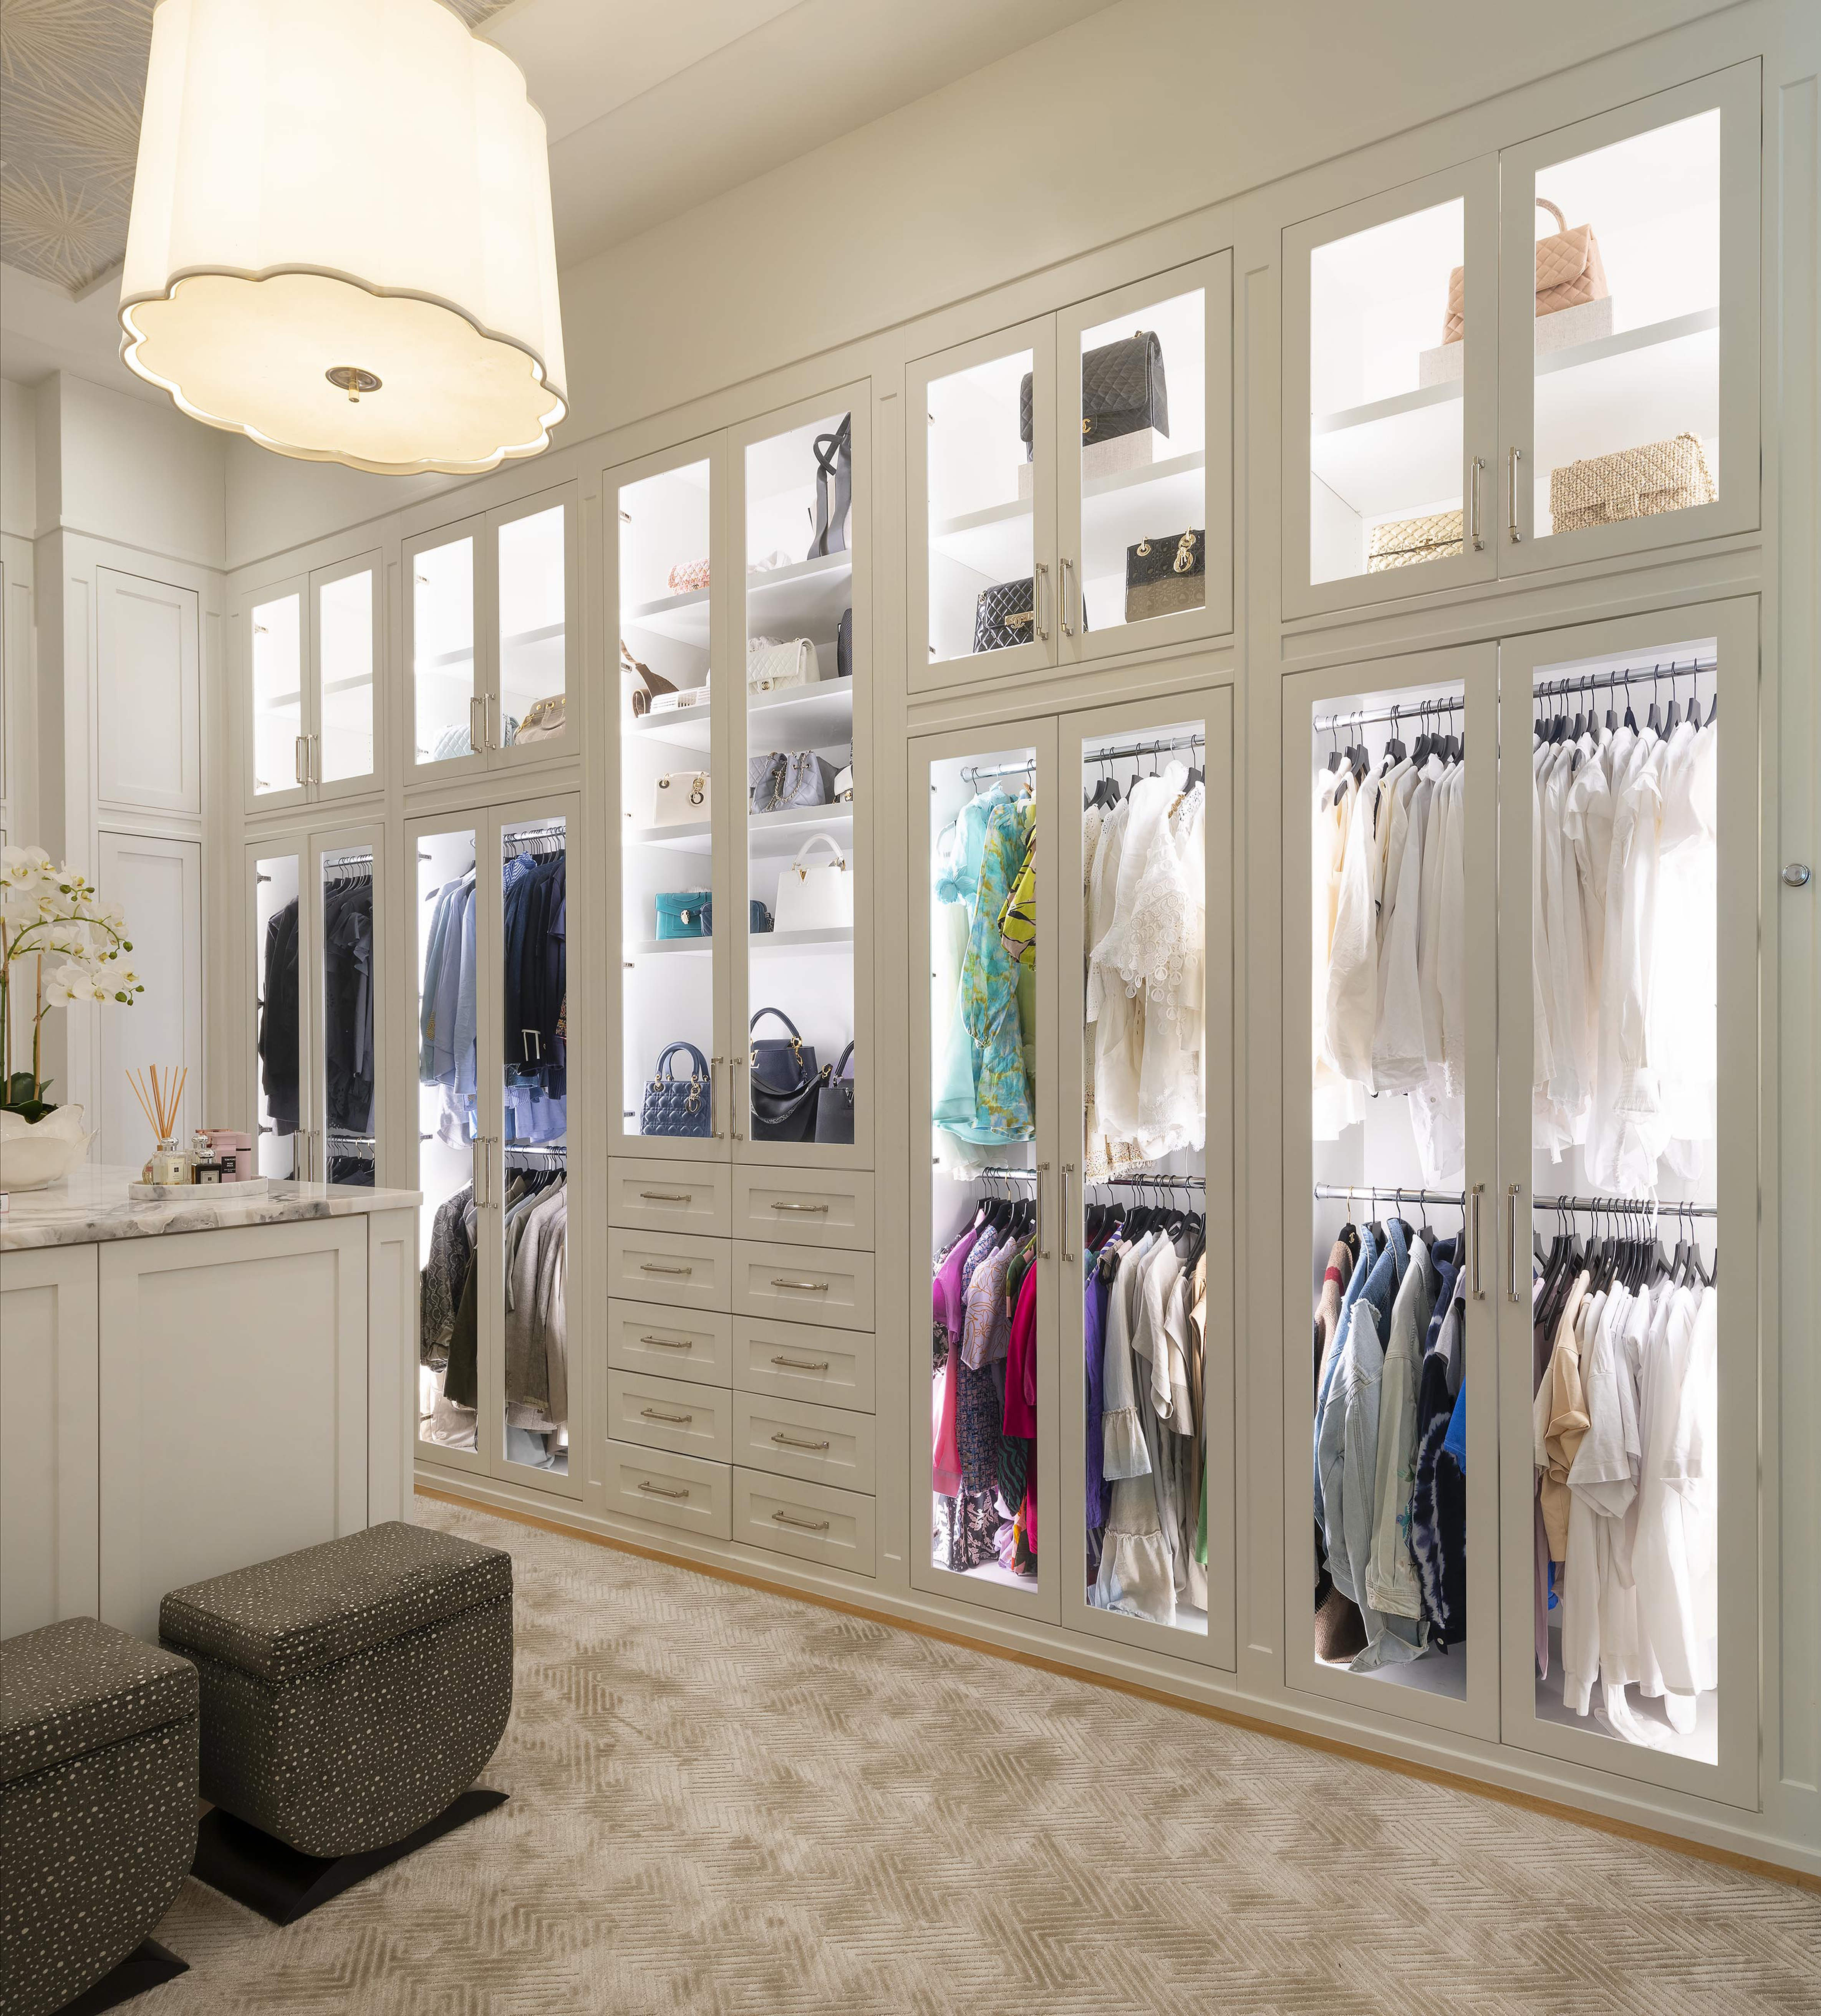 The Luxury Closet and the Luxiary Goods industry The